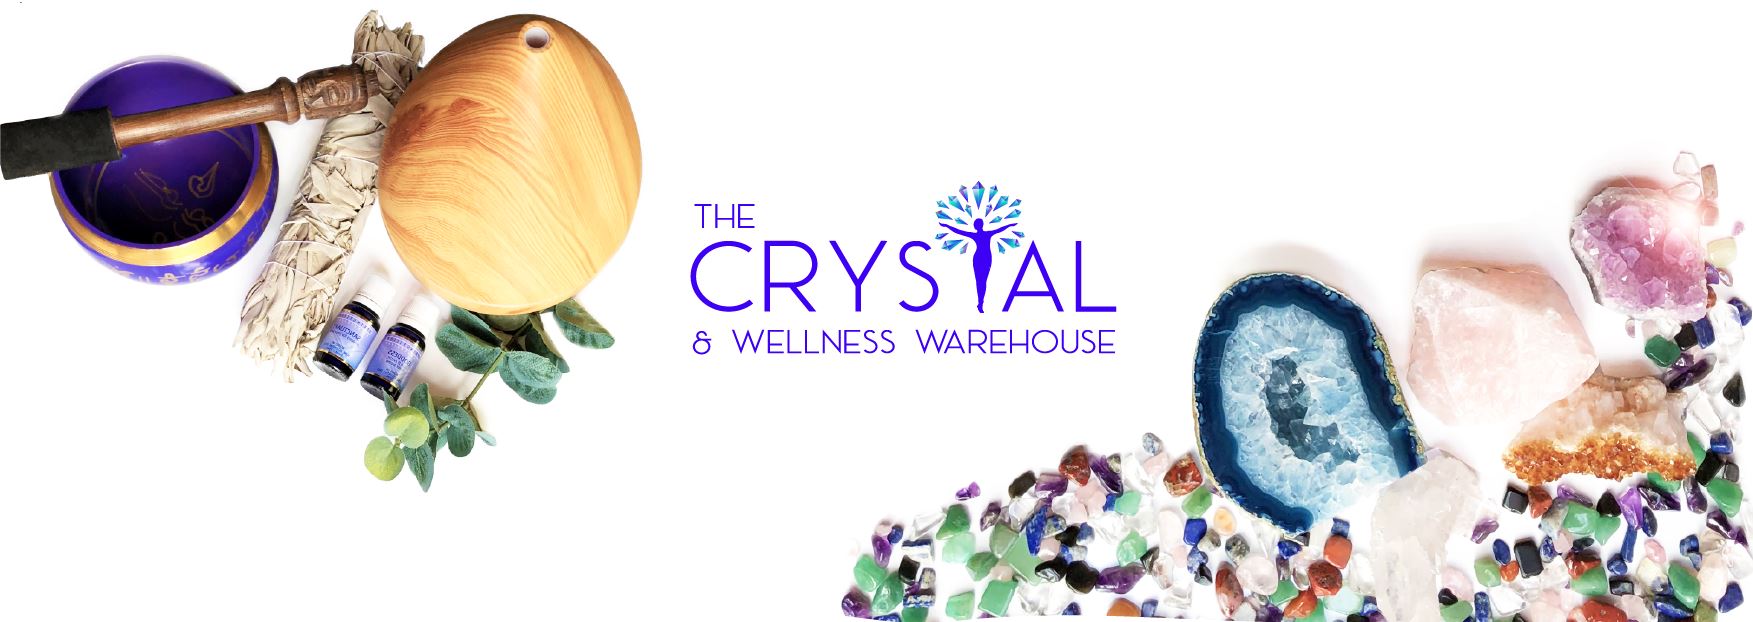 The Crystal and Wellness Gift Voucher Gift Voucher The Crystal and Wellness Warehouse 